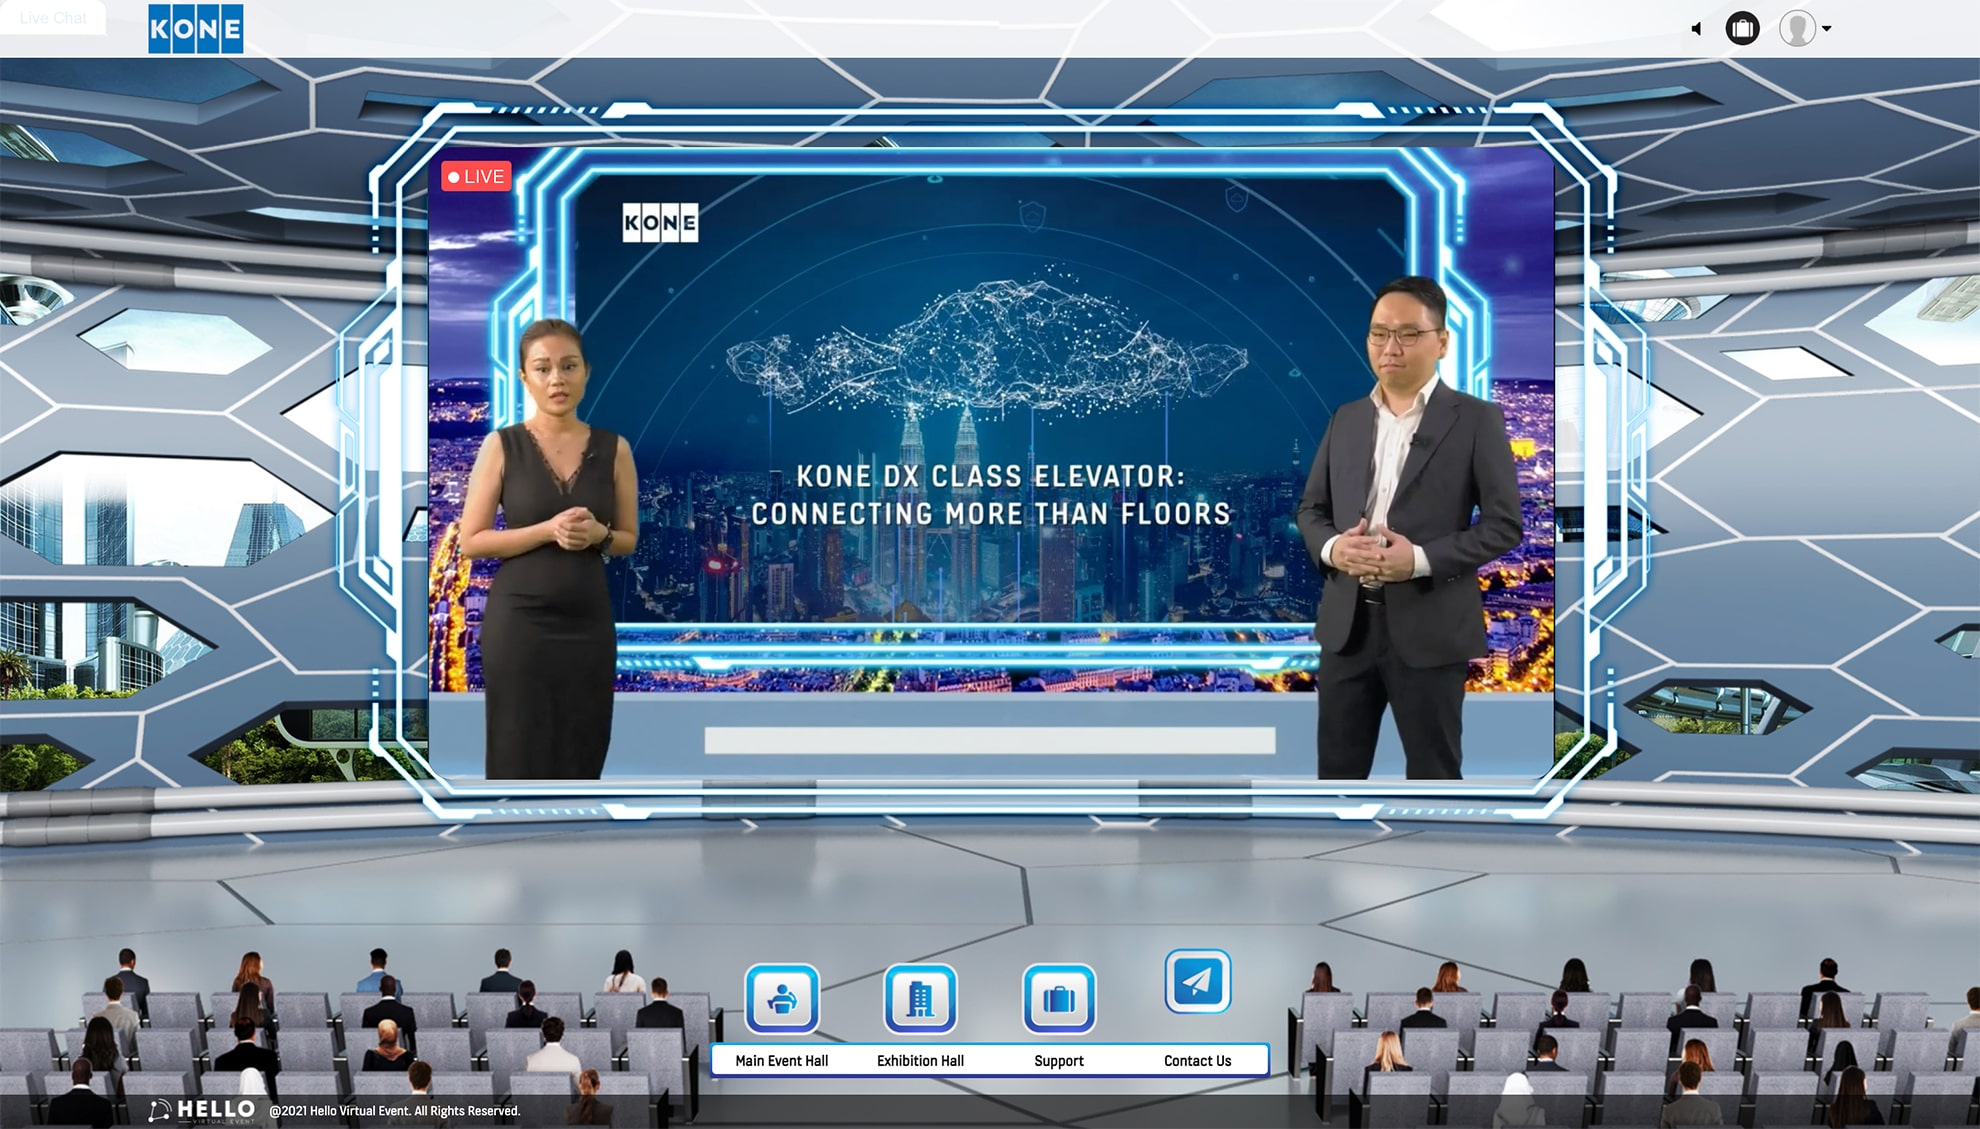 Azleen hosted the KONE virtual event in Malaysia and has achieved an impactful event engagement with the virtual audiences.